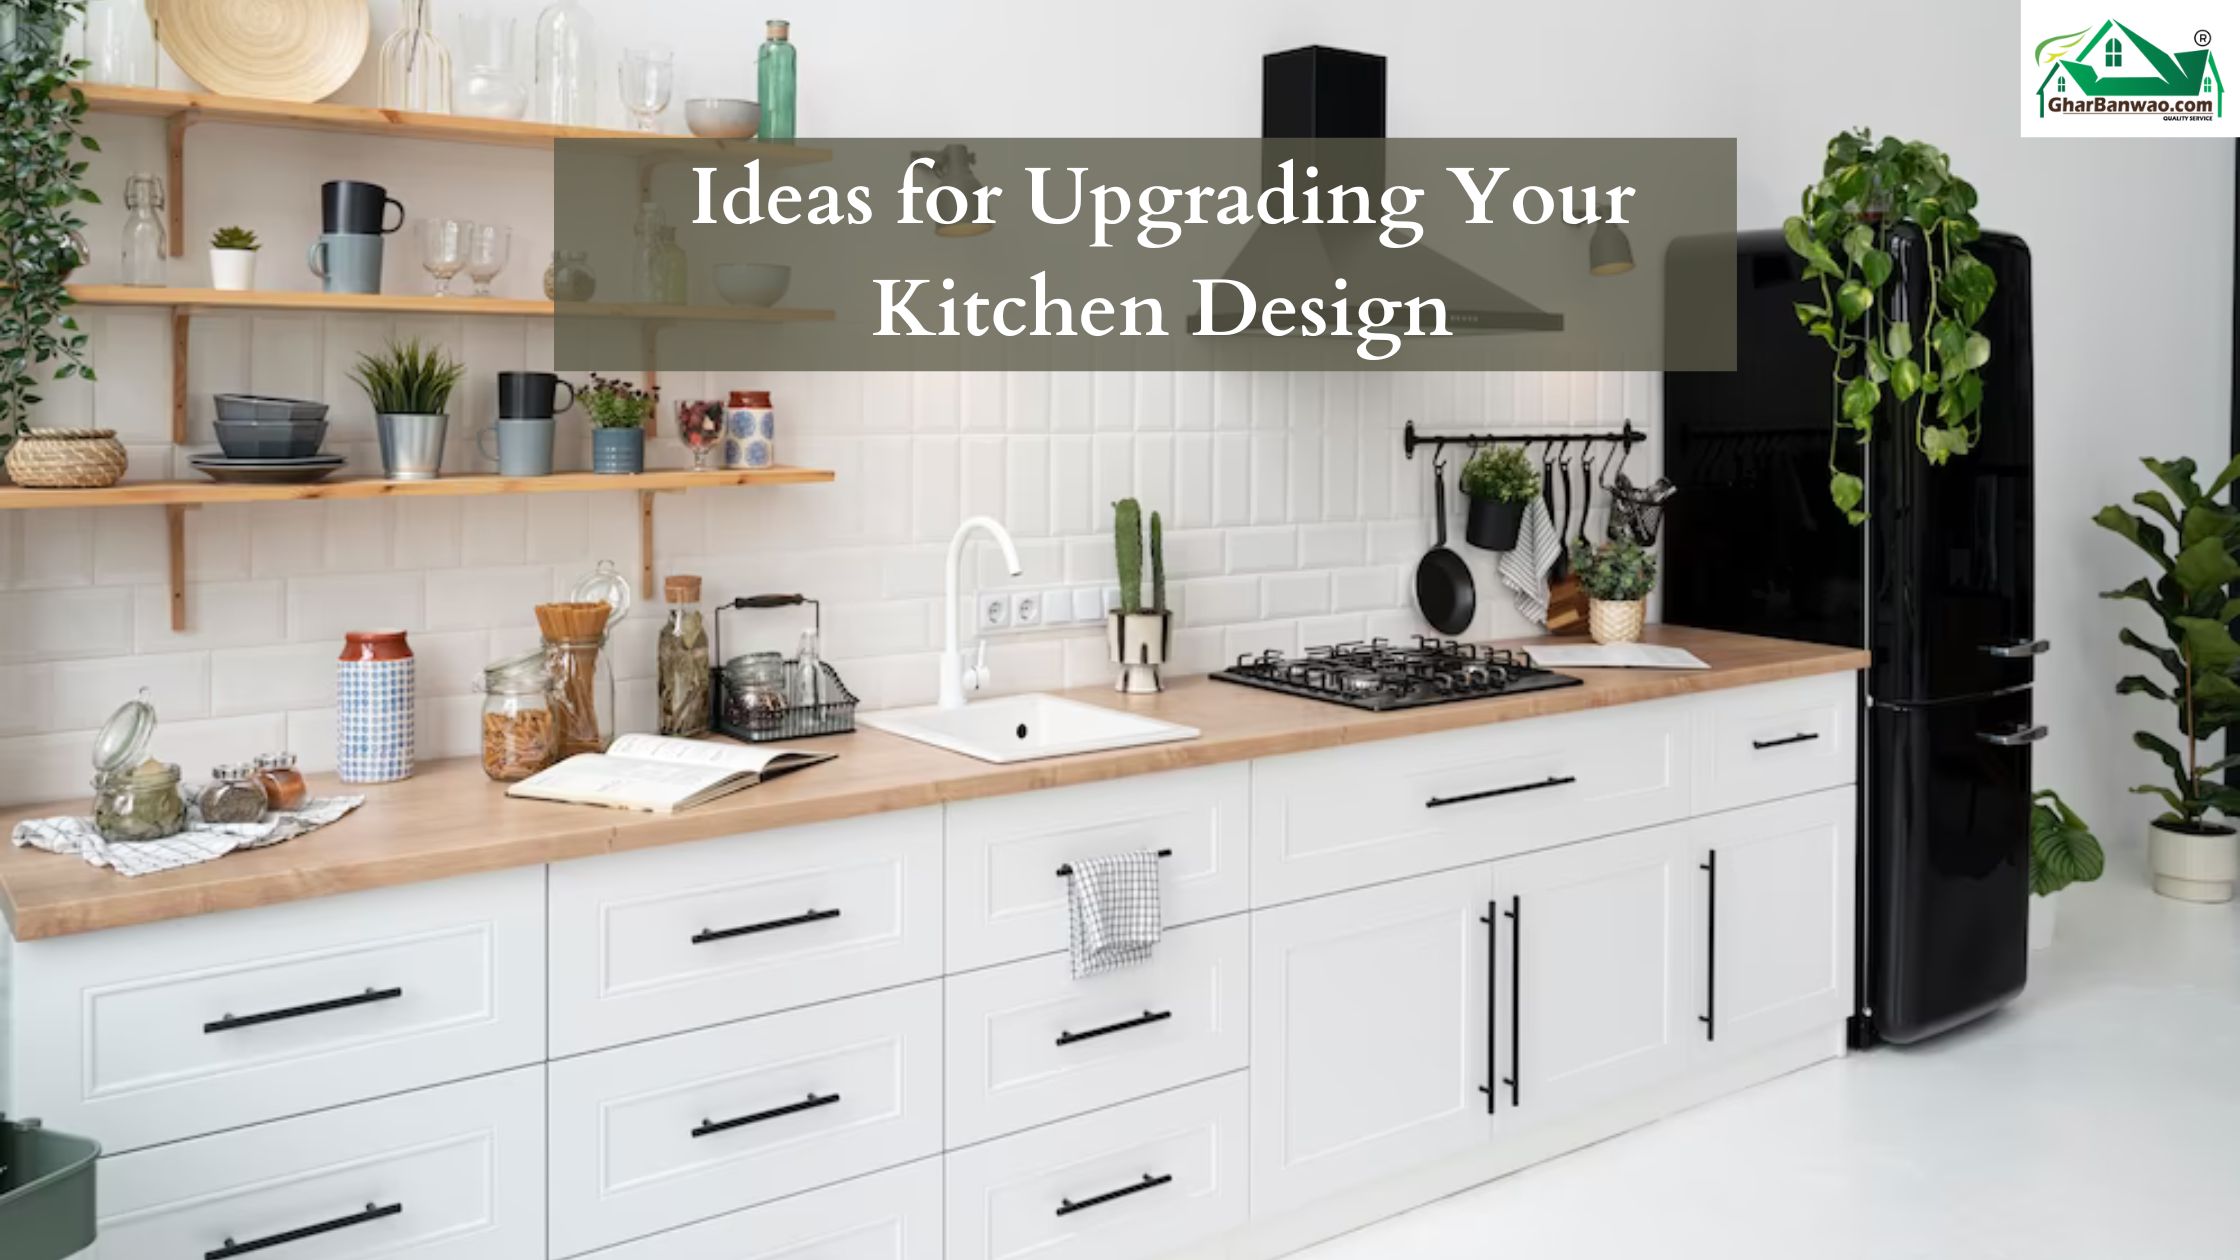 Ideas for Upgrading Your Kitchen Design